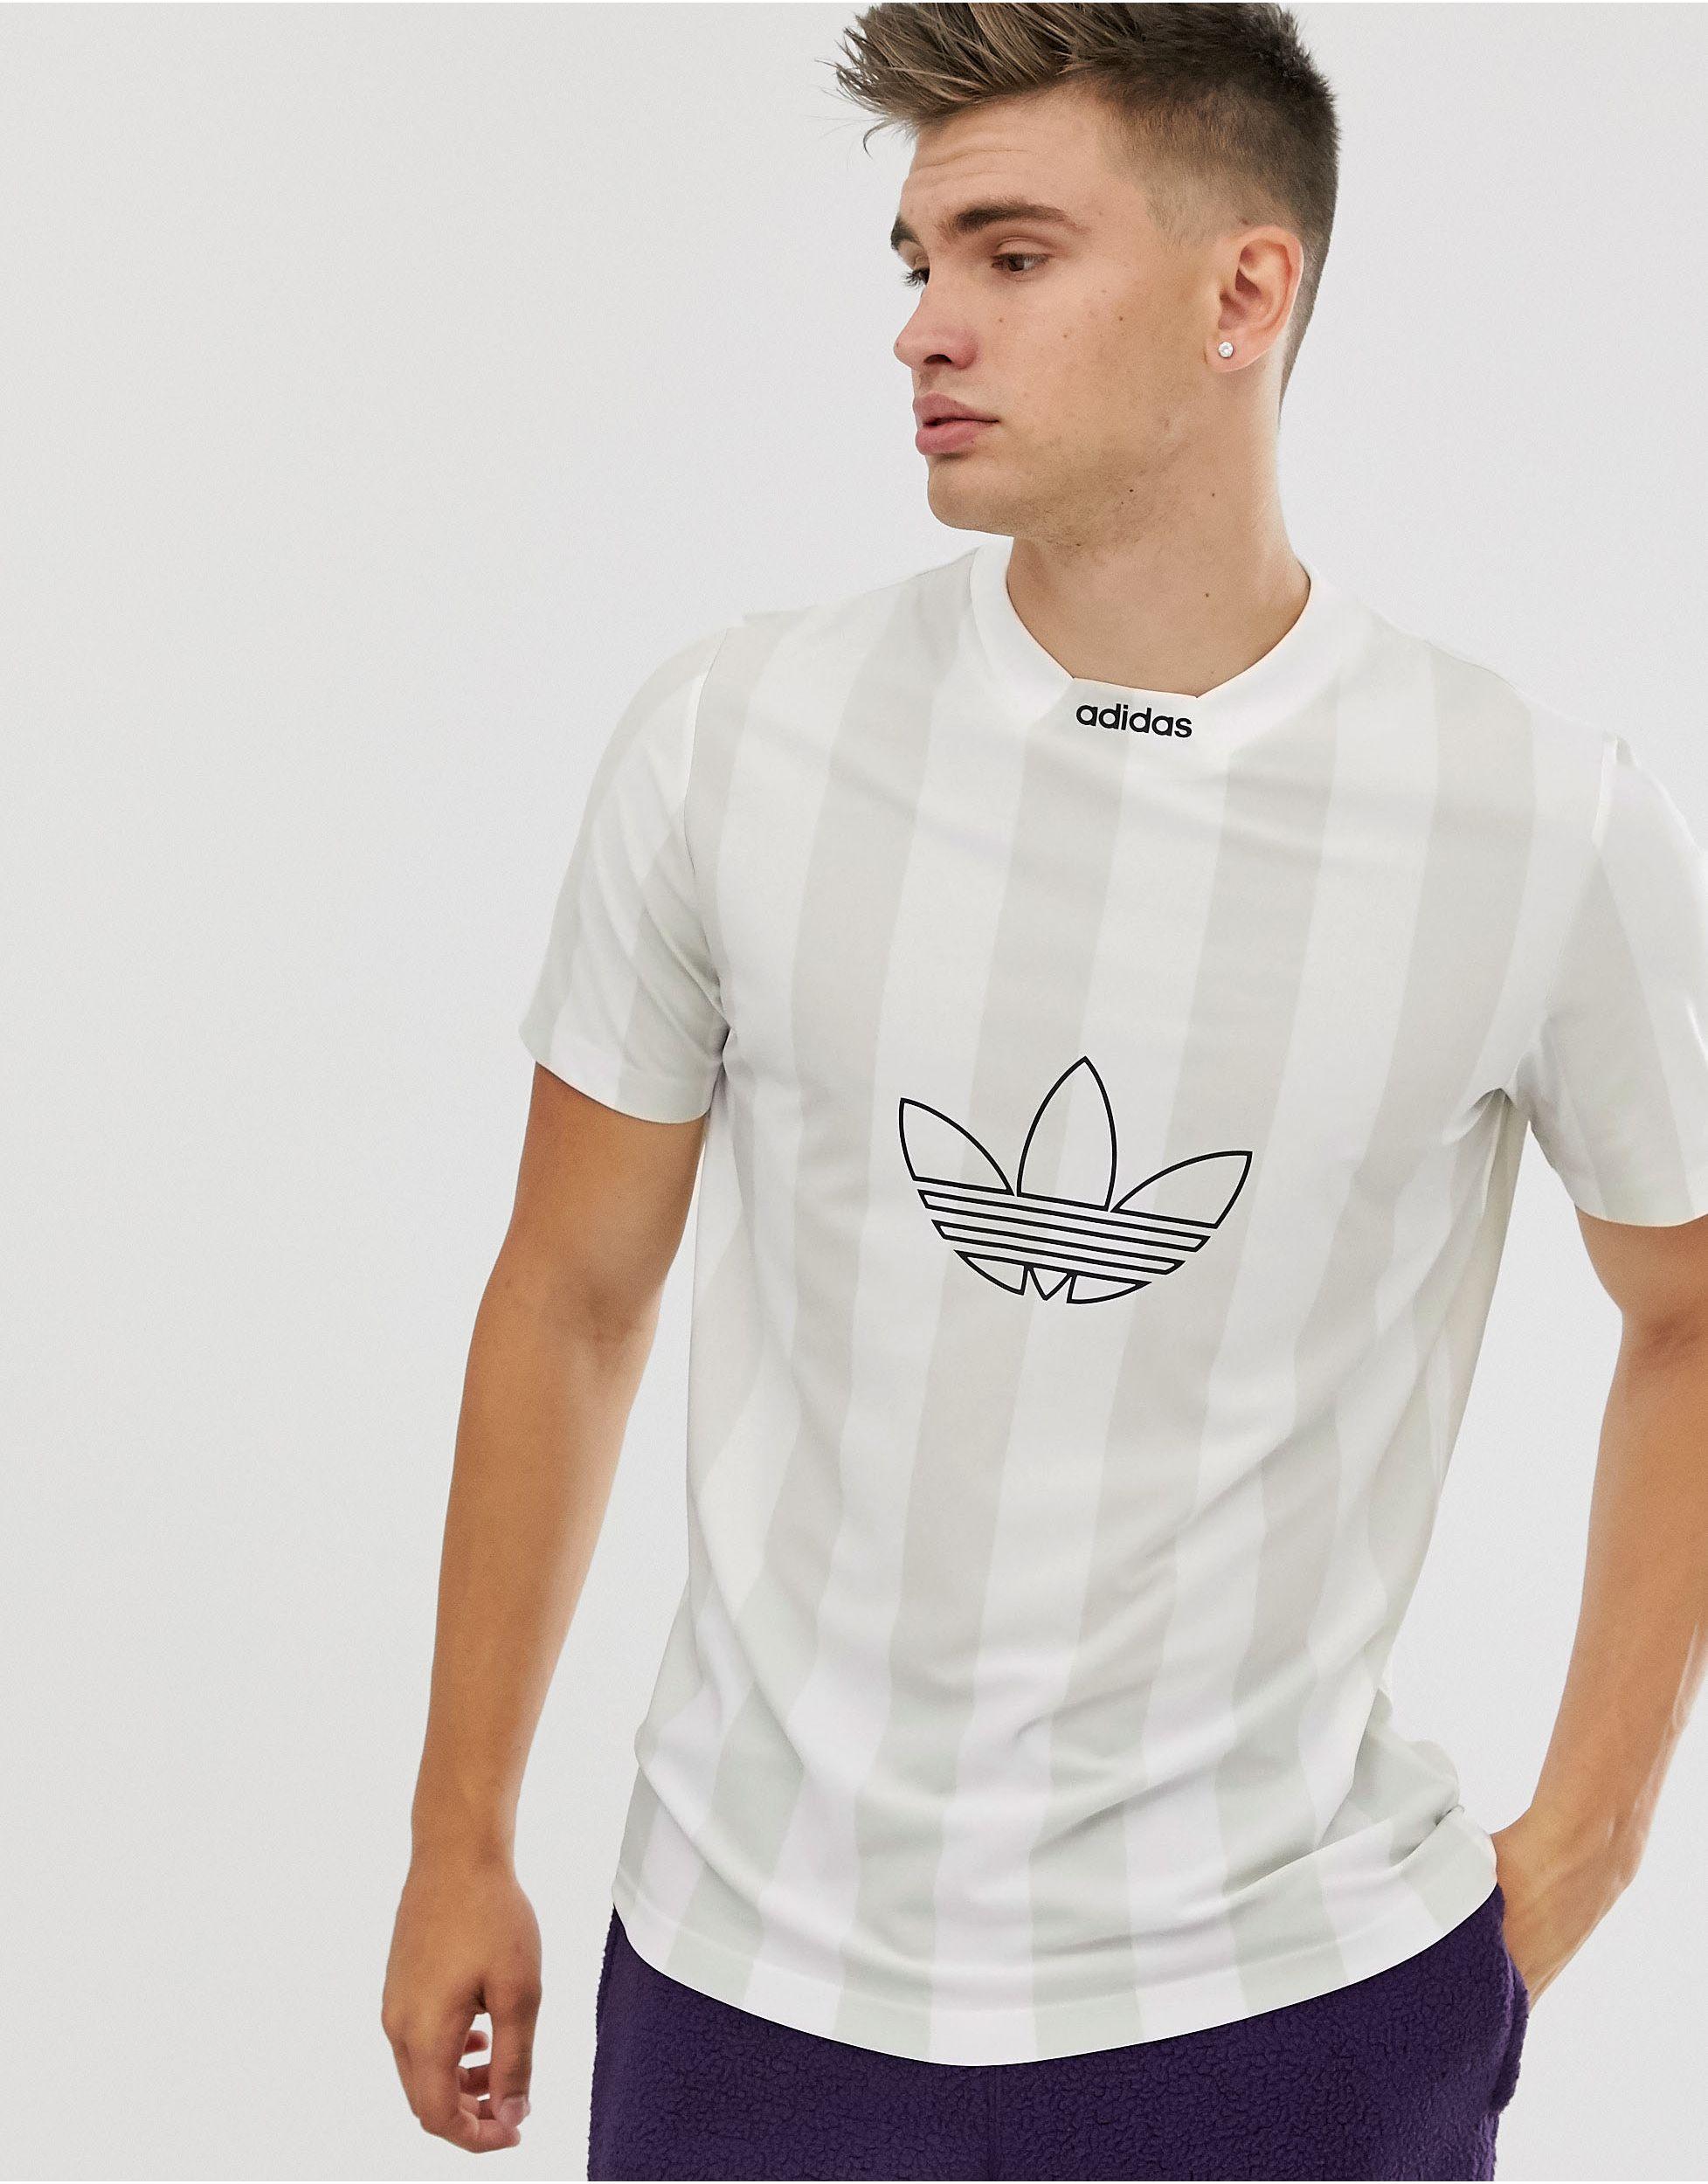 adidas Originals T-shirt With Stripes And Central Logo in White for Men -  Lyst